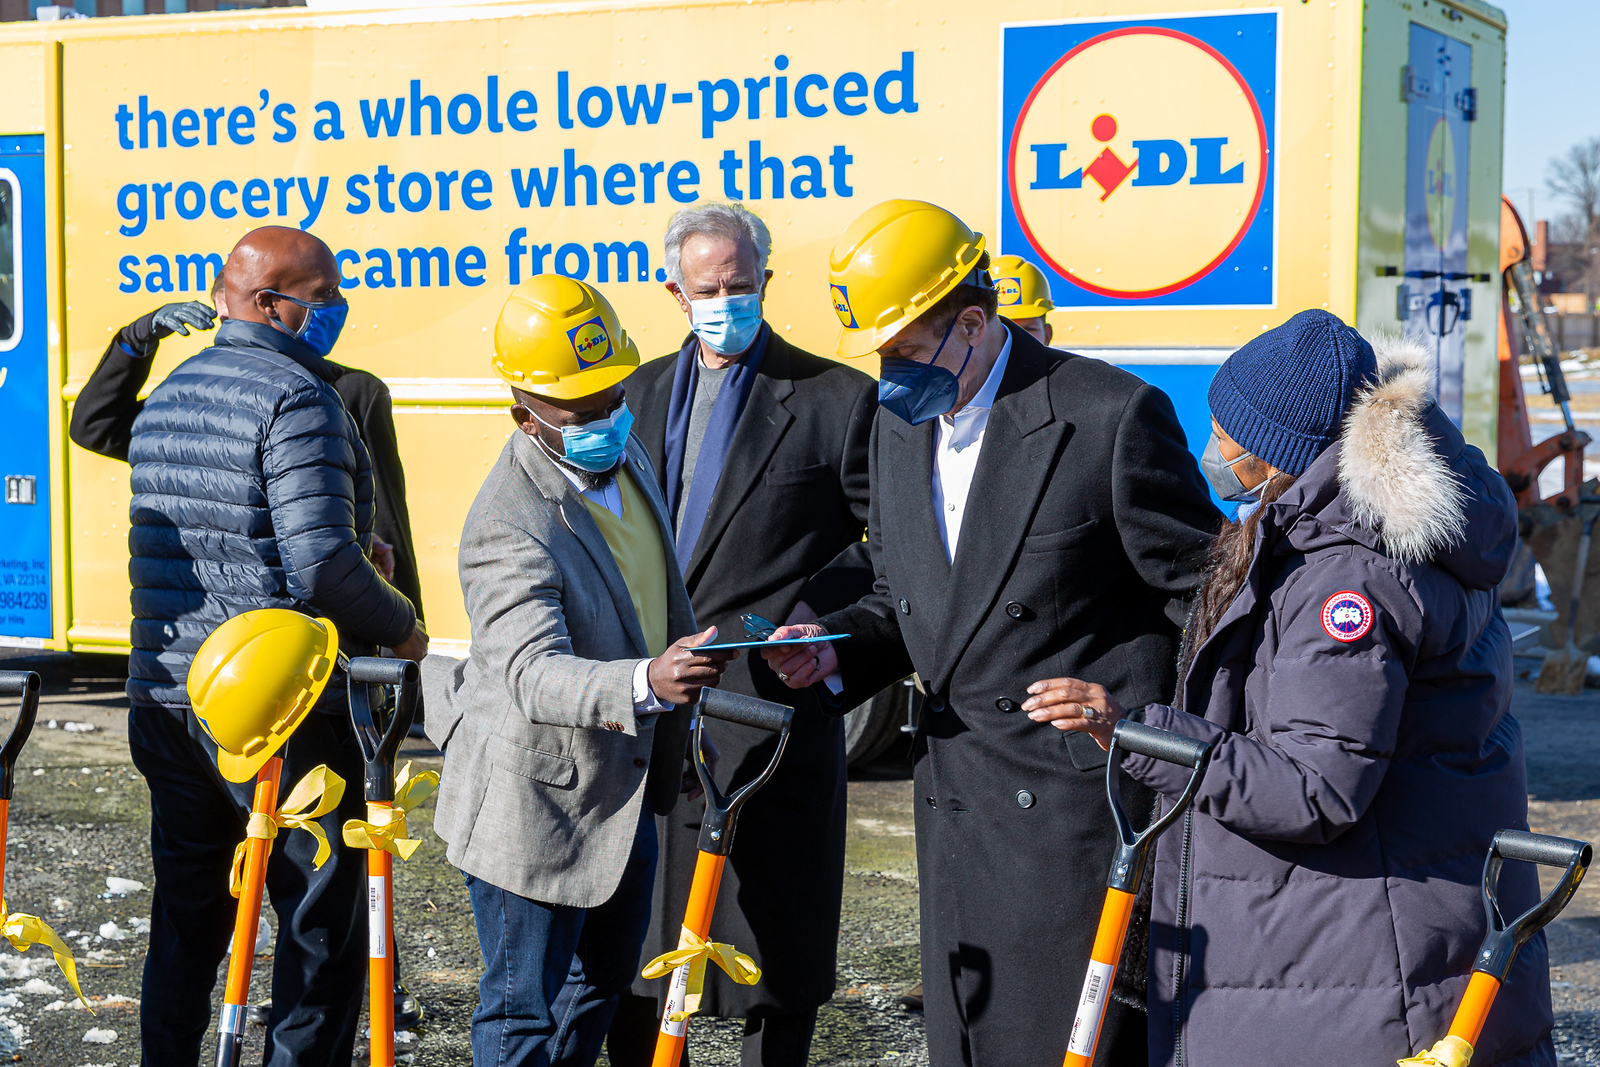 lidl-ground-breaking-participants-look-at-clipboard